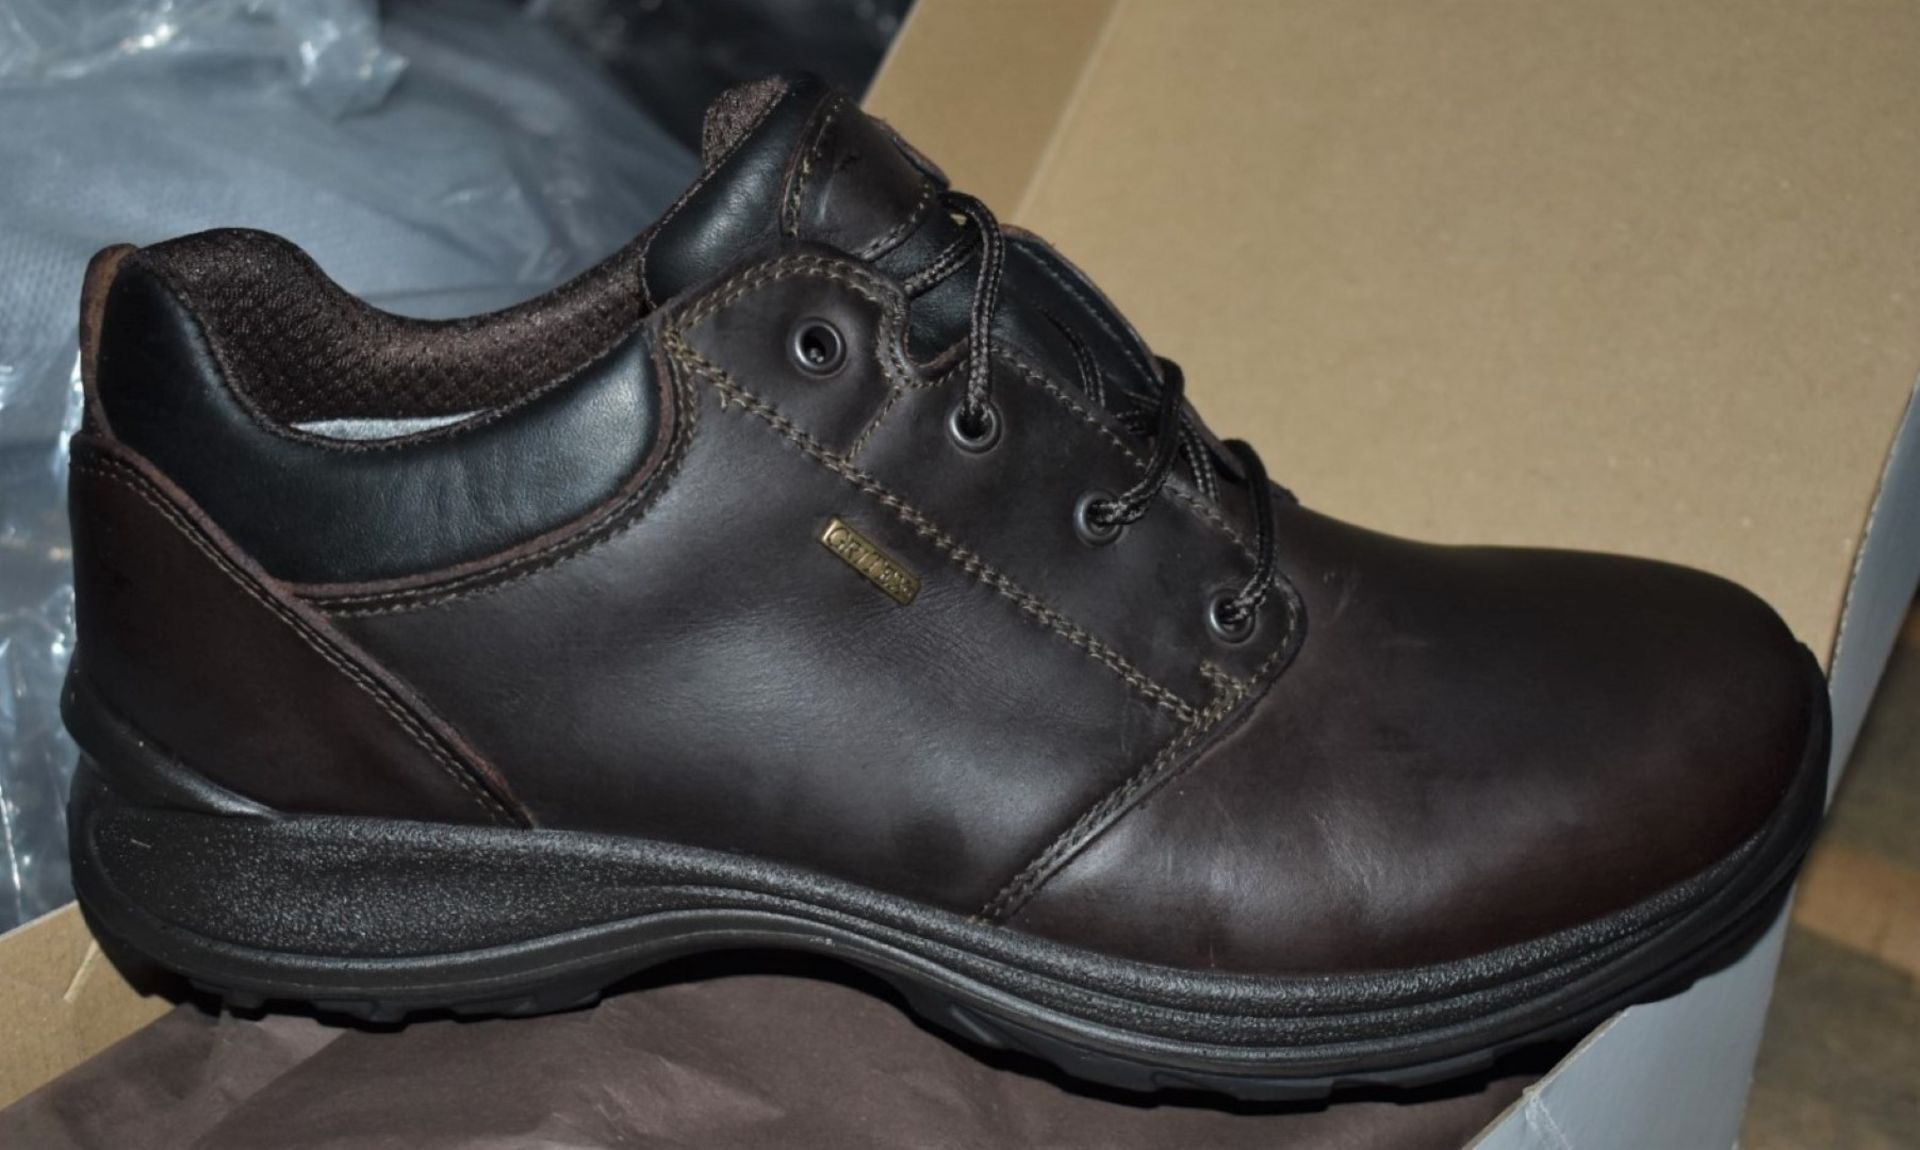 1 x Pair of Men's Grisport Brown Leather GriTex Shoes - Rogerson Footwear - Brand New and Boxed - - Image 4 of 10